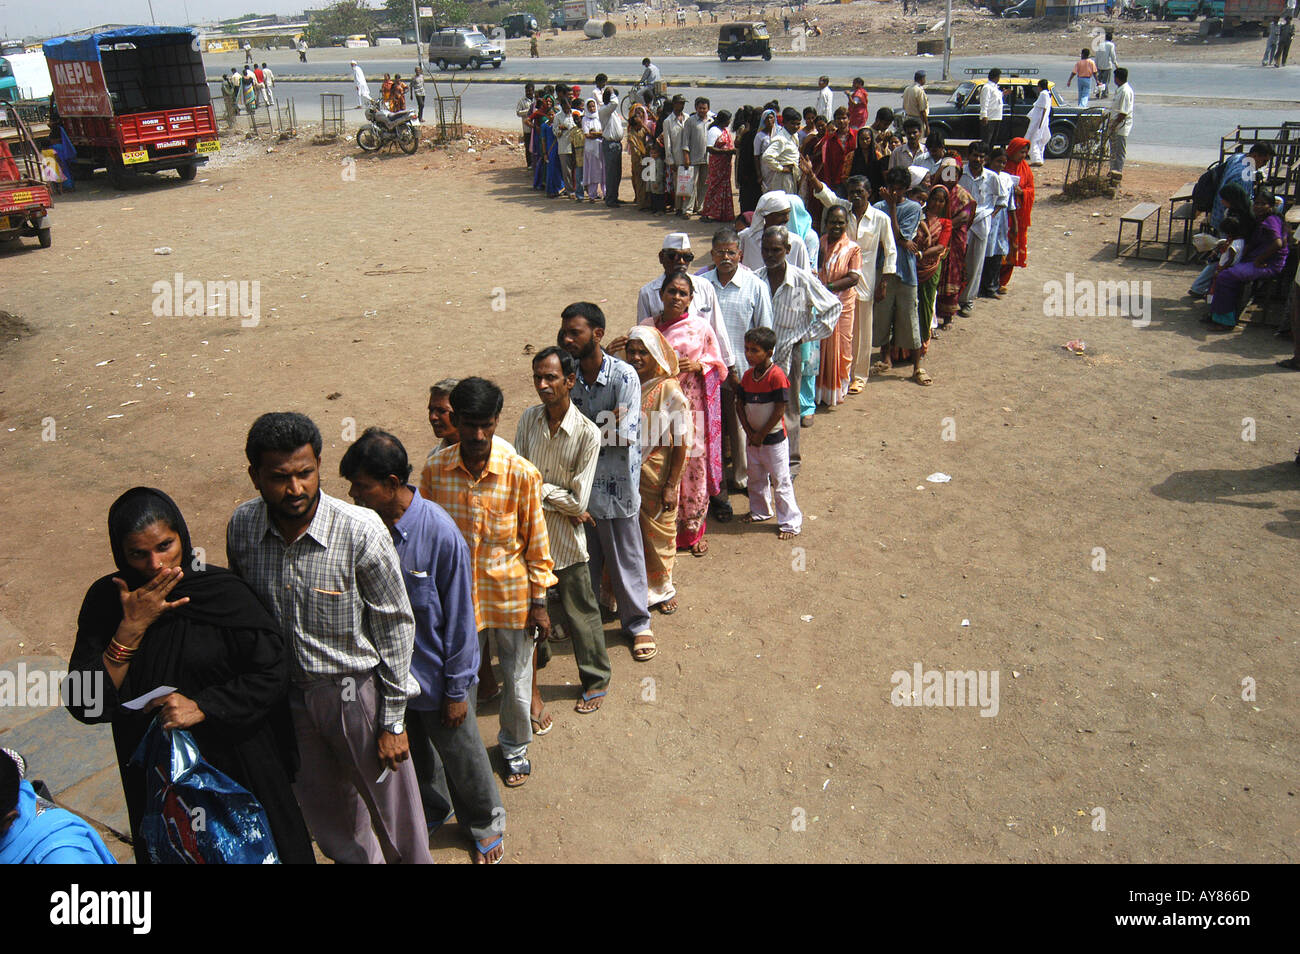 Line for casting vote in Indian elections Stock Photo